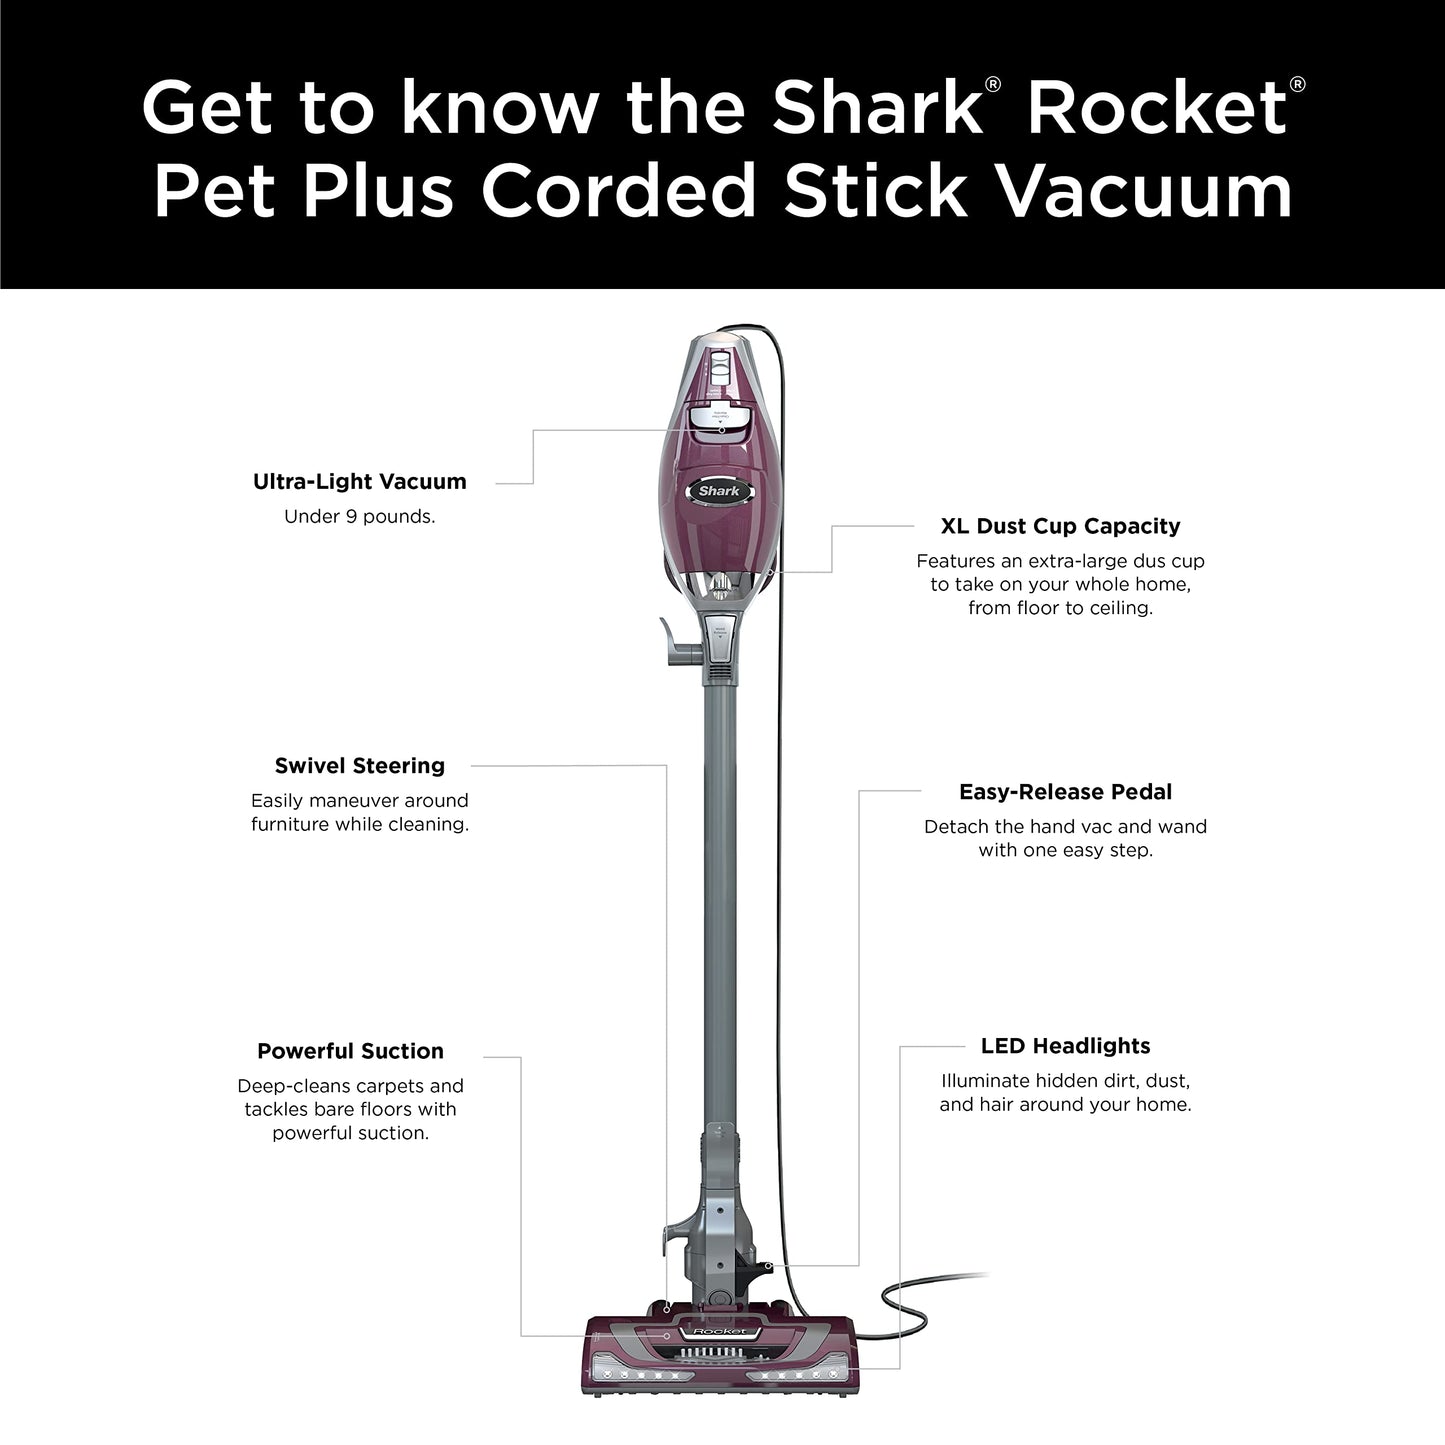 Shark HV322 Rocket Deluxe Pro Corded Stick Vacuum with LED Headlights, XL Dust Cup, Lightweight, Perfect for Pet Hair Pickup